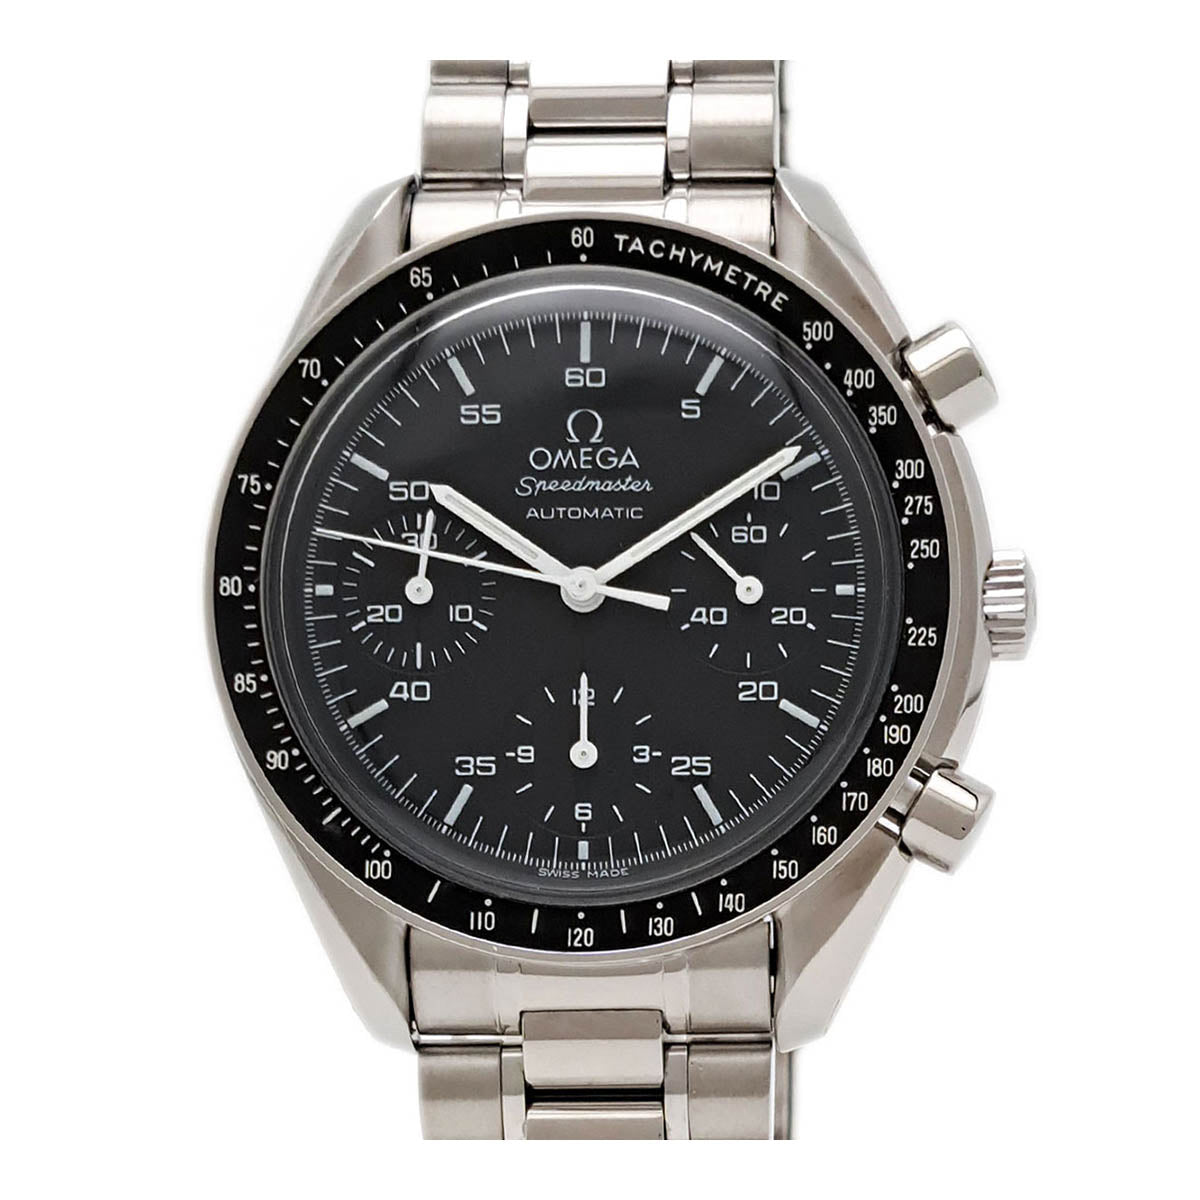 OMEGA Speedmaster Reduced Automatic Chronograph Men's Watch in Stainless Steel 3510.5